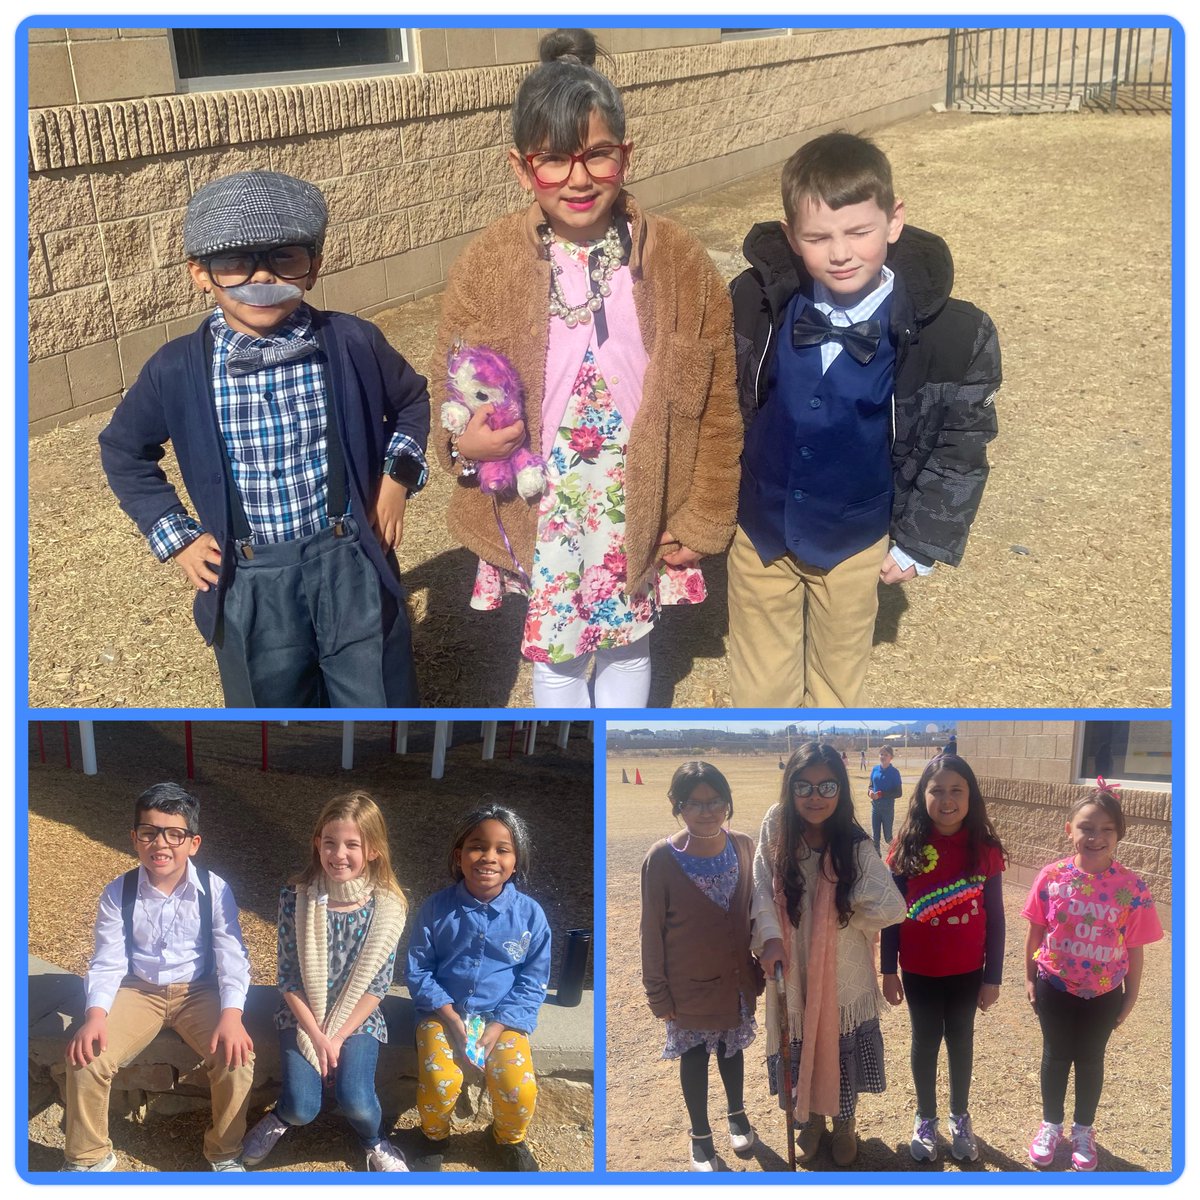 Celebrating the 100th Day of School was a blast! Students rocked either the '100-year-old' look or flaunted awesome shirts adorned with 100 items. The creativity and spirit were truly impressive! ❤️💙 #THEDISTRICT @YsletaISD @slahrman